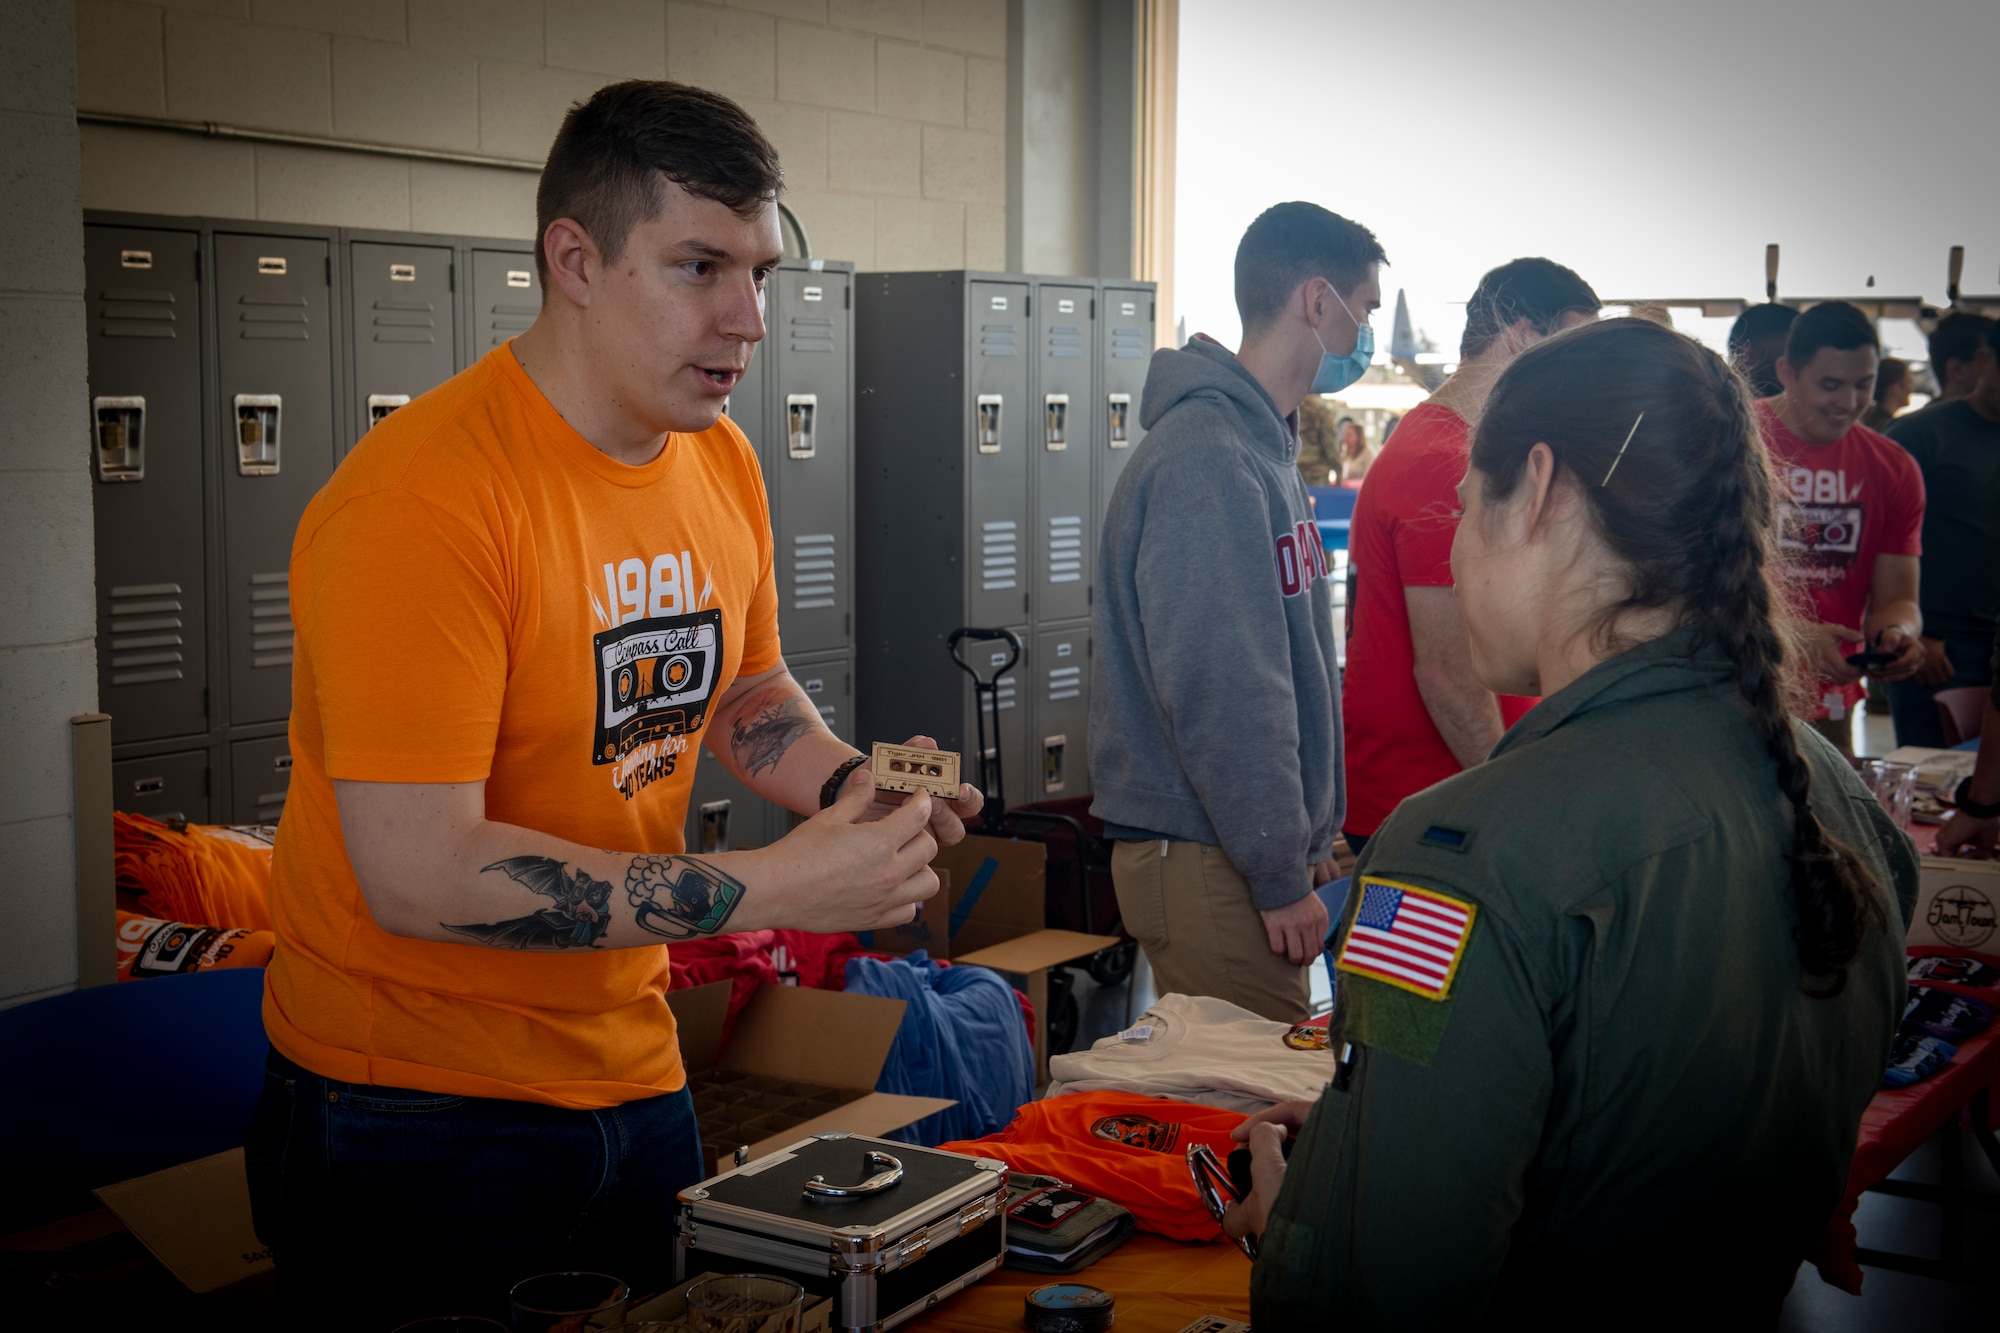 An active duty member shows a squadron magnet to another active duty member